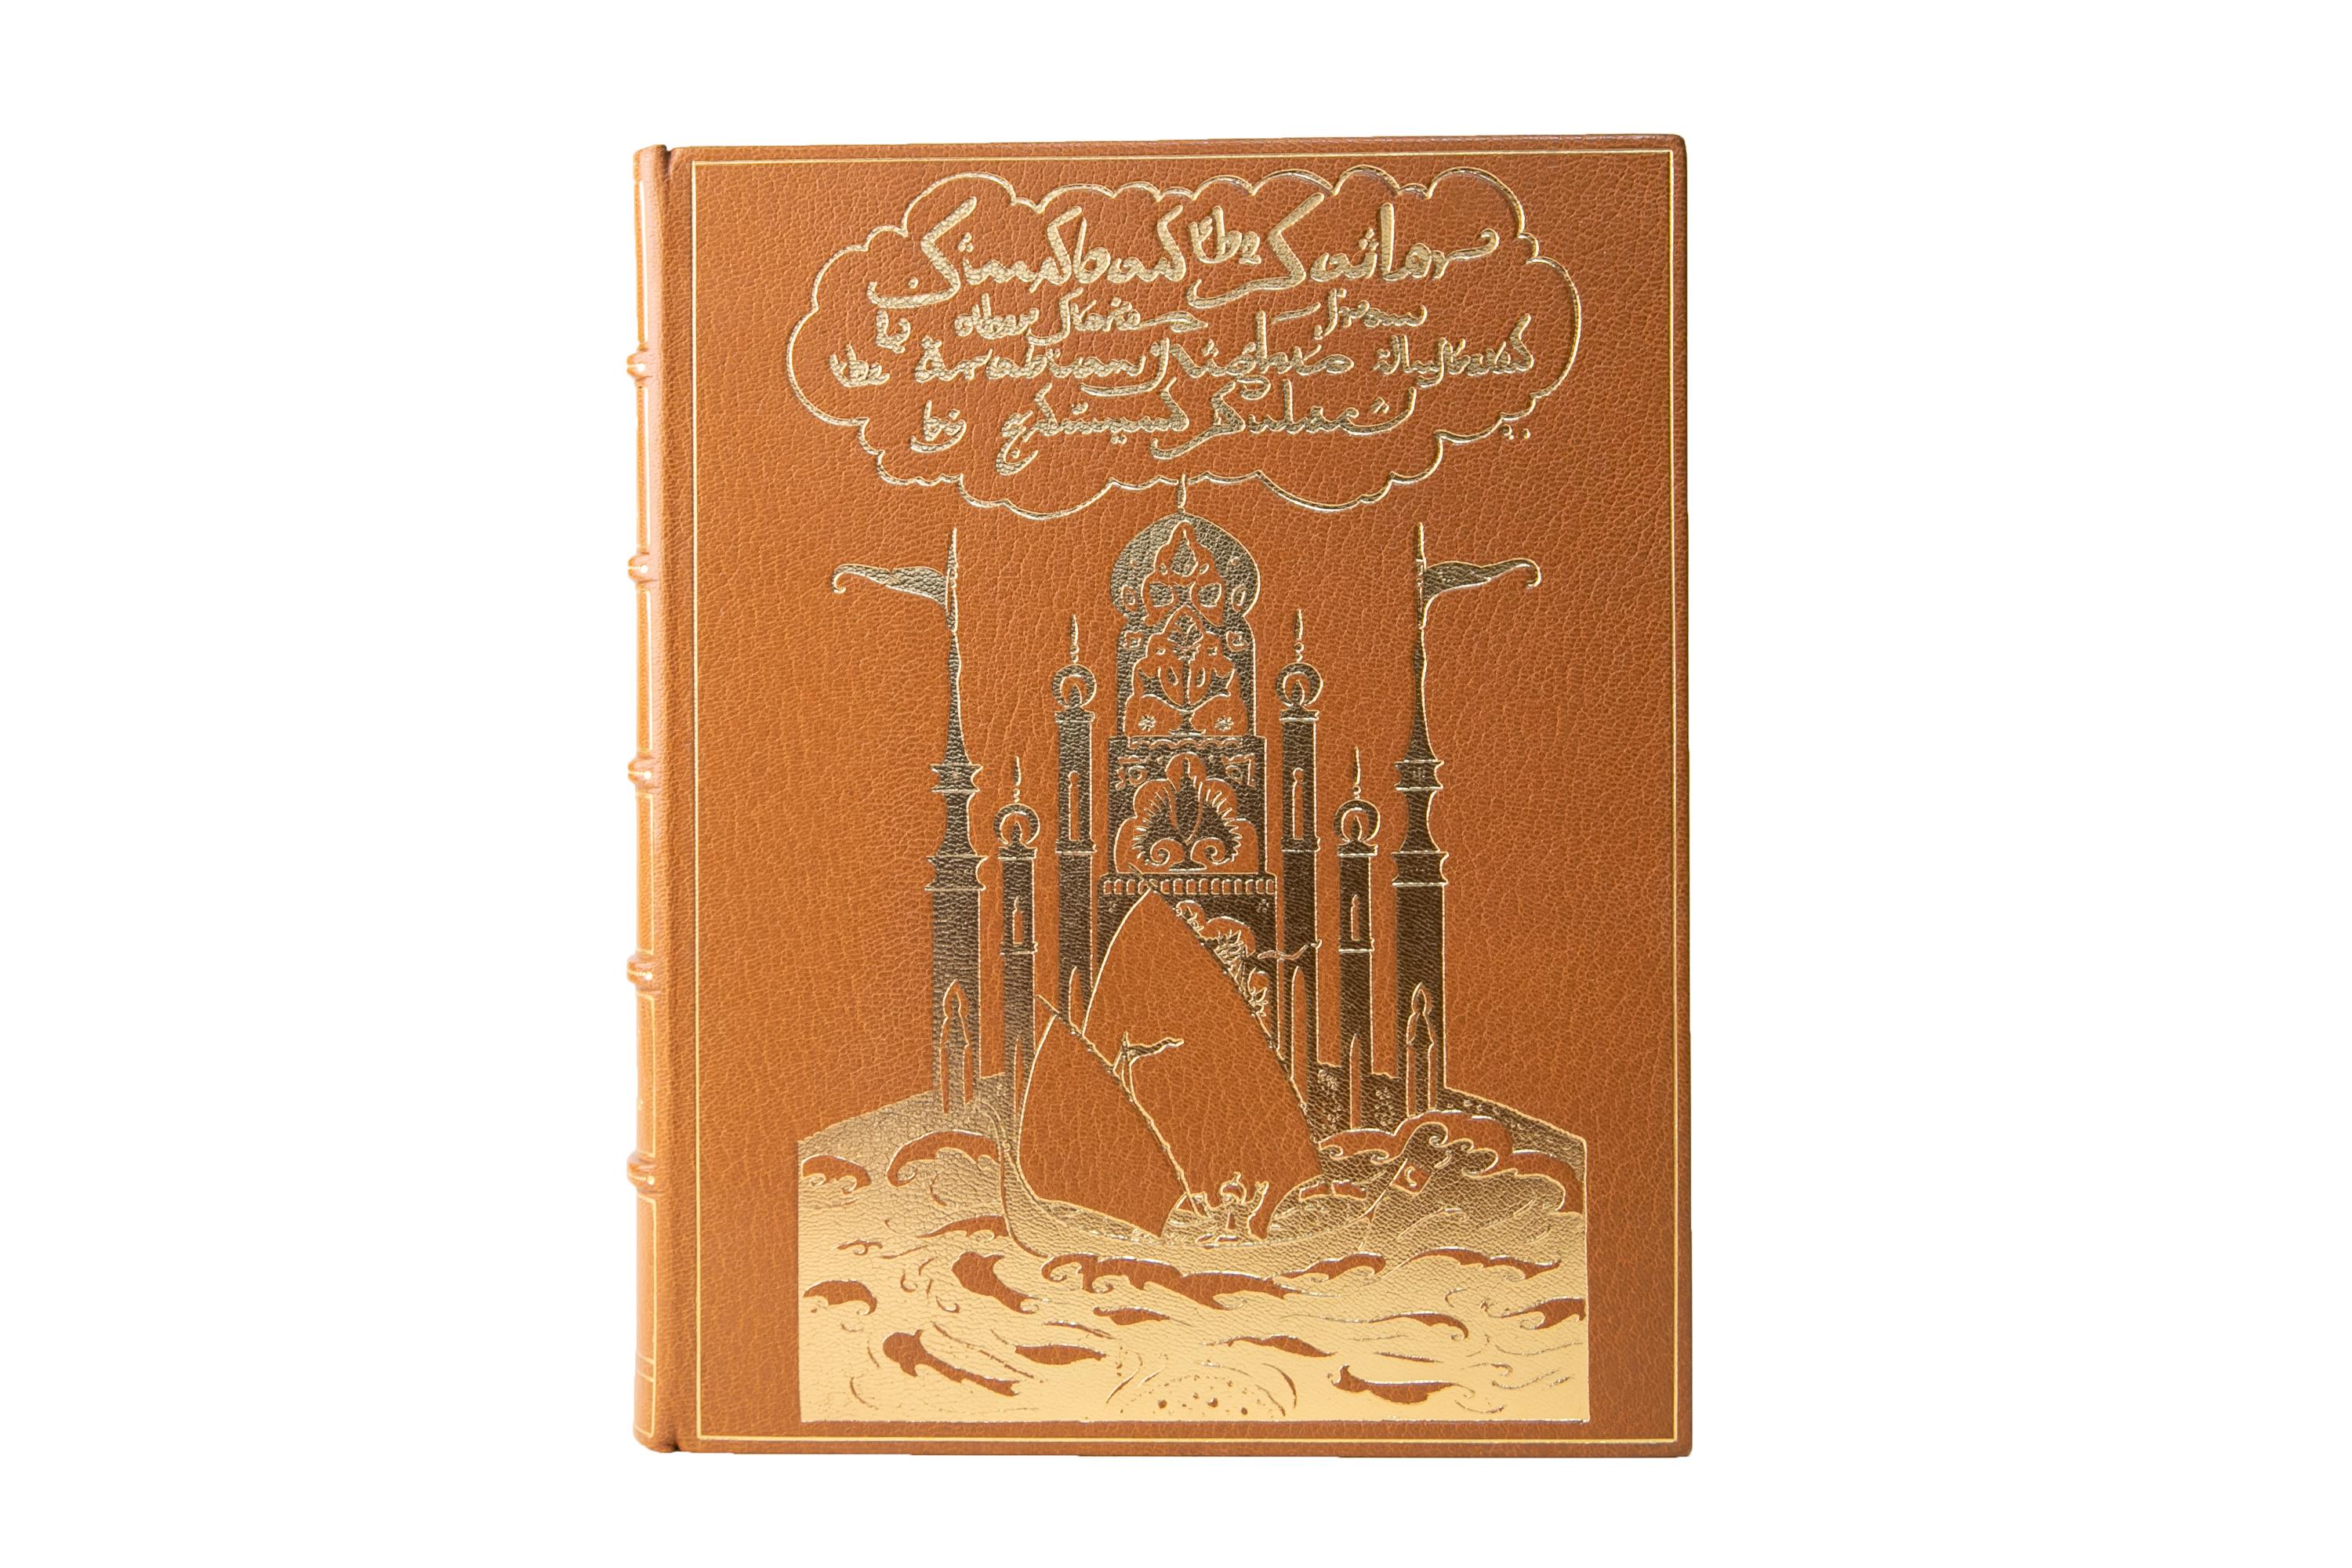 1 Volume. Gyula Krùdy, Sinbad the Sailor. First Trade Edition. Bound by Sangorski & Sutcliffe in full orange morocco. The cover displays a depiction of a castle surrounded by water and title lettering, both gilt-tooled. The spine displays raised